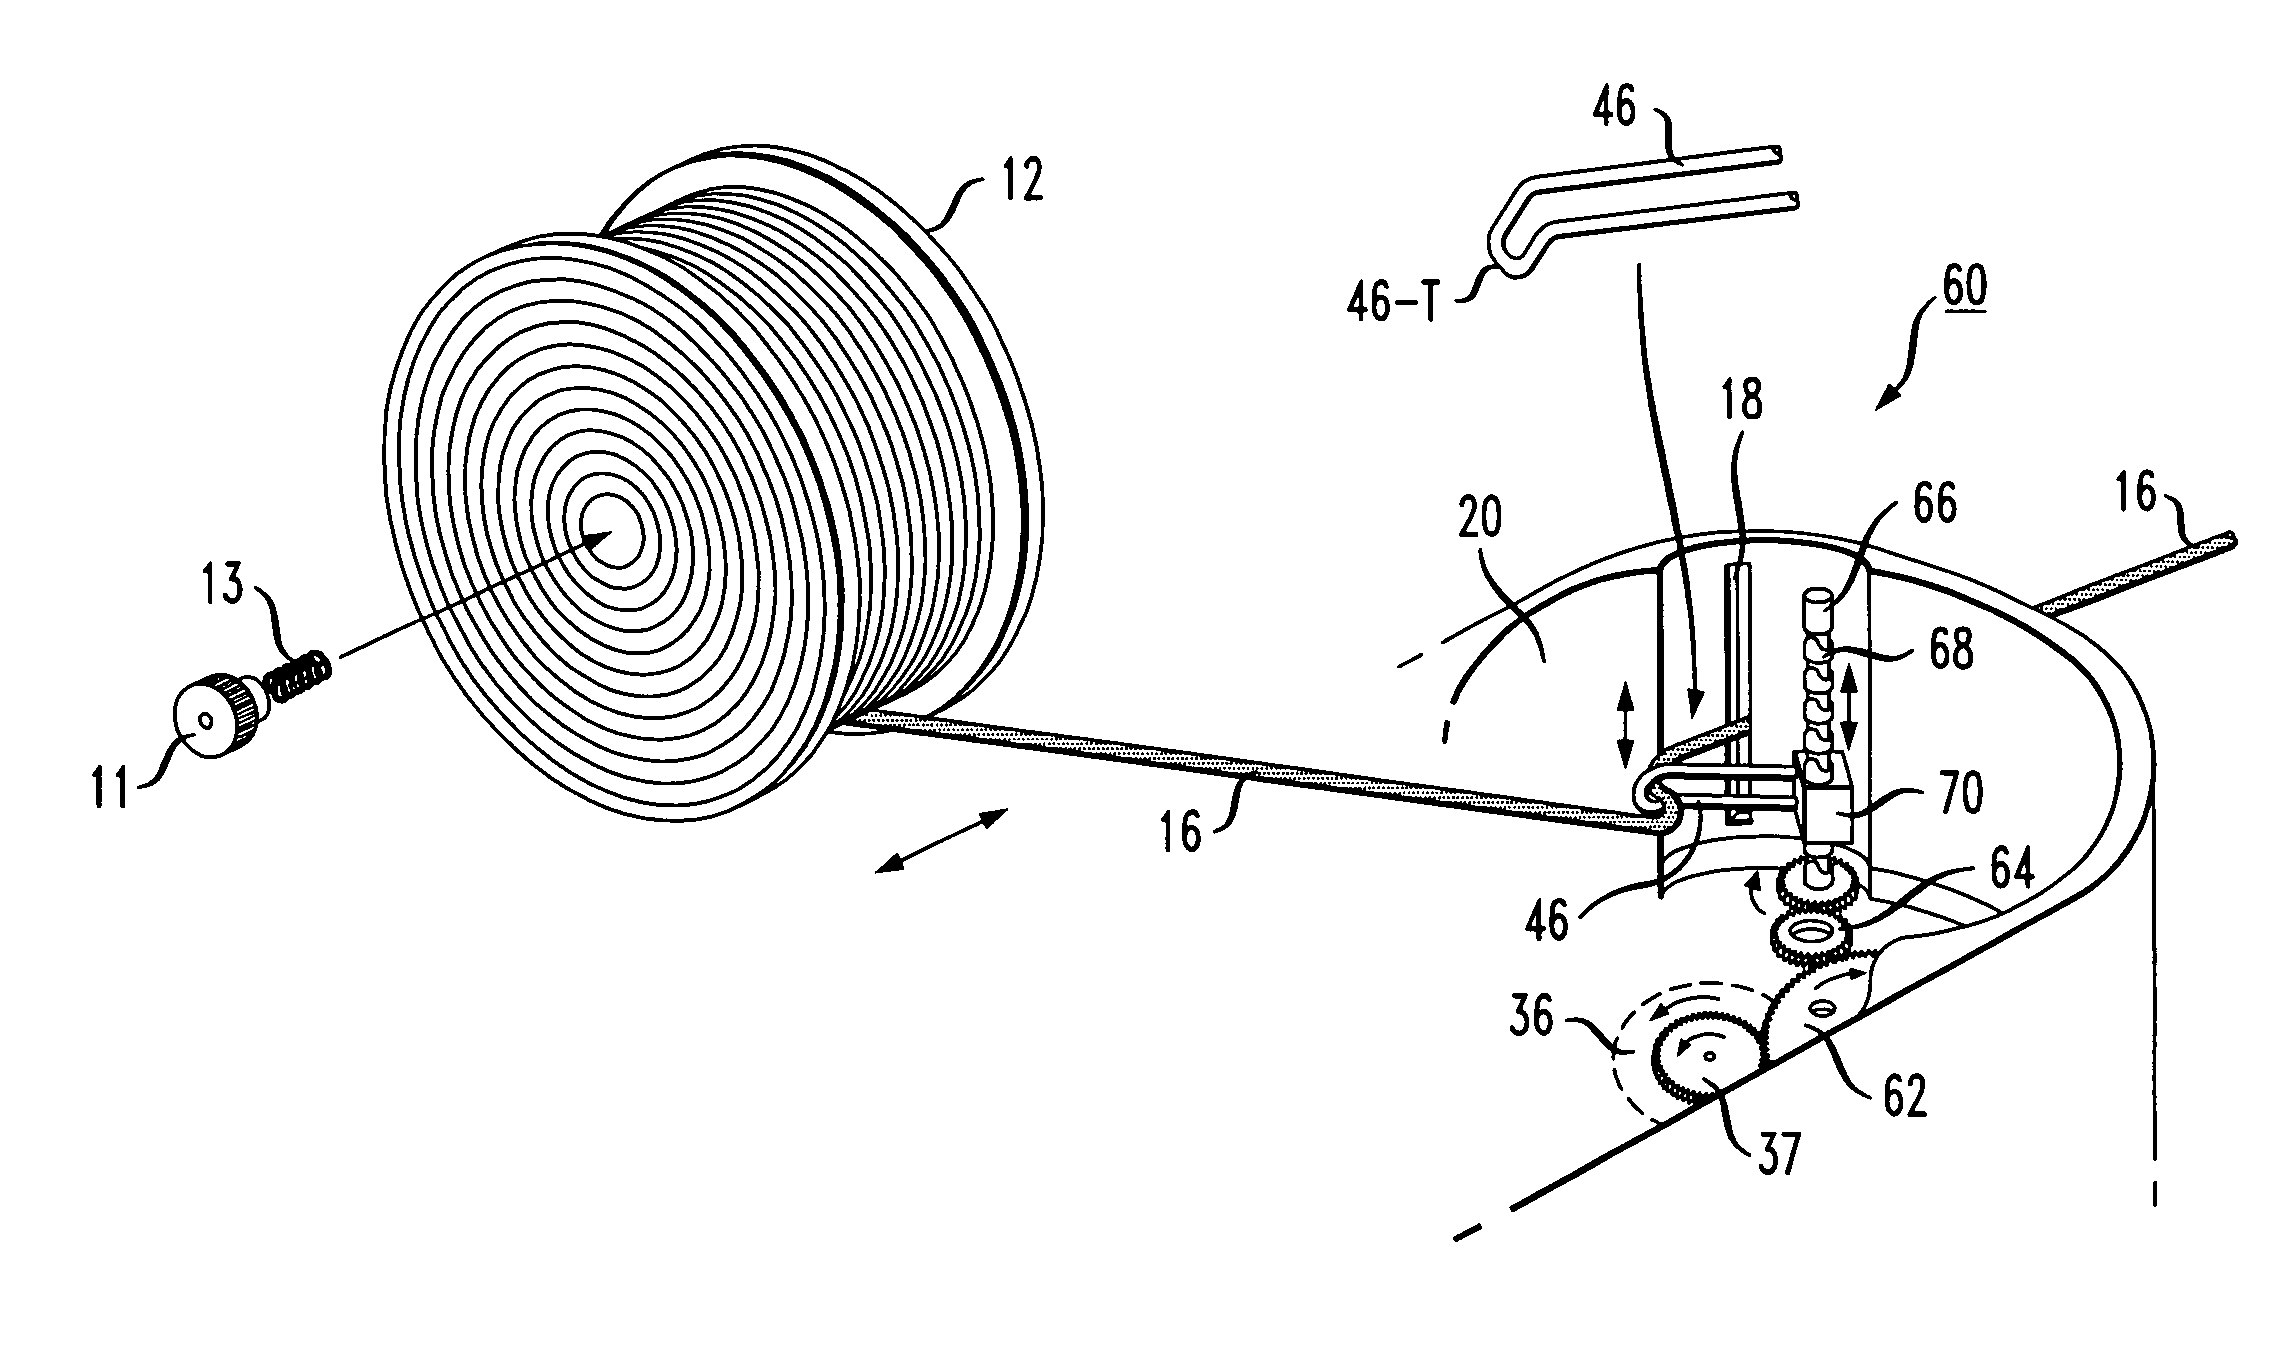 Motorized self-winding reel for divers